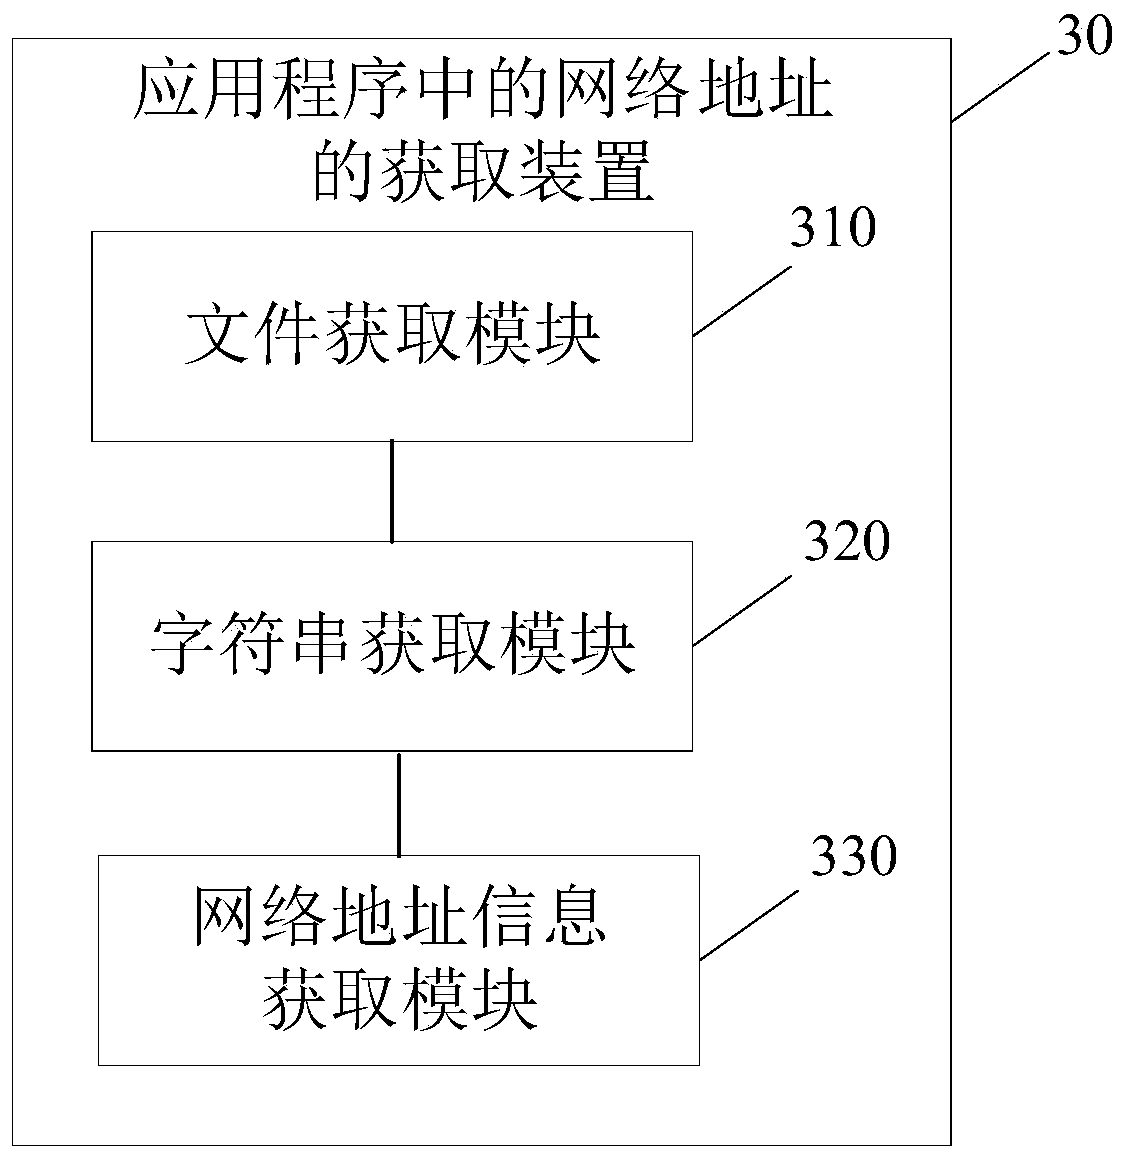 Method and device for acquiring network address in application program, equipment and medium